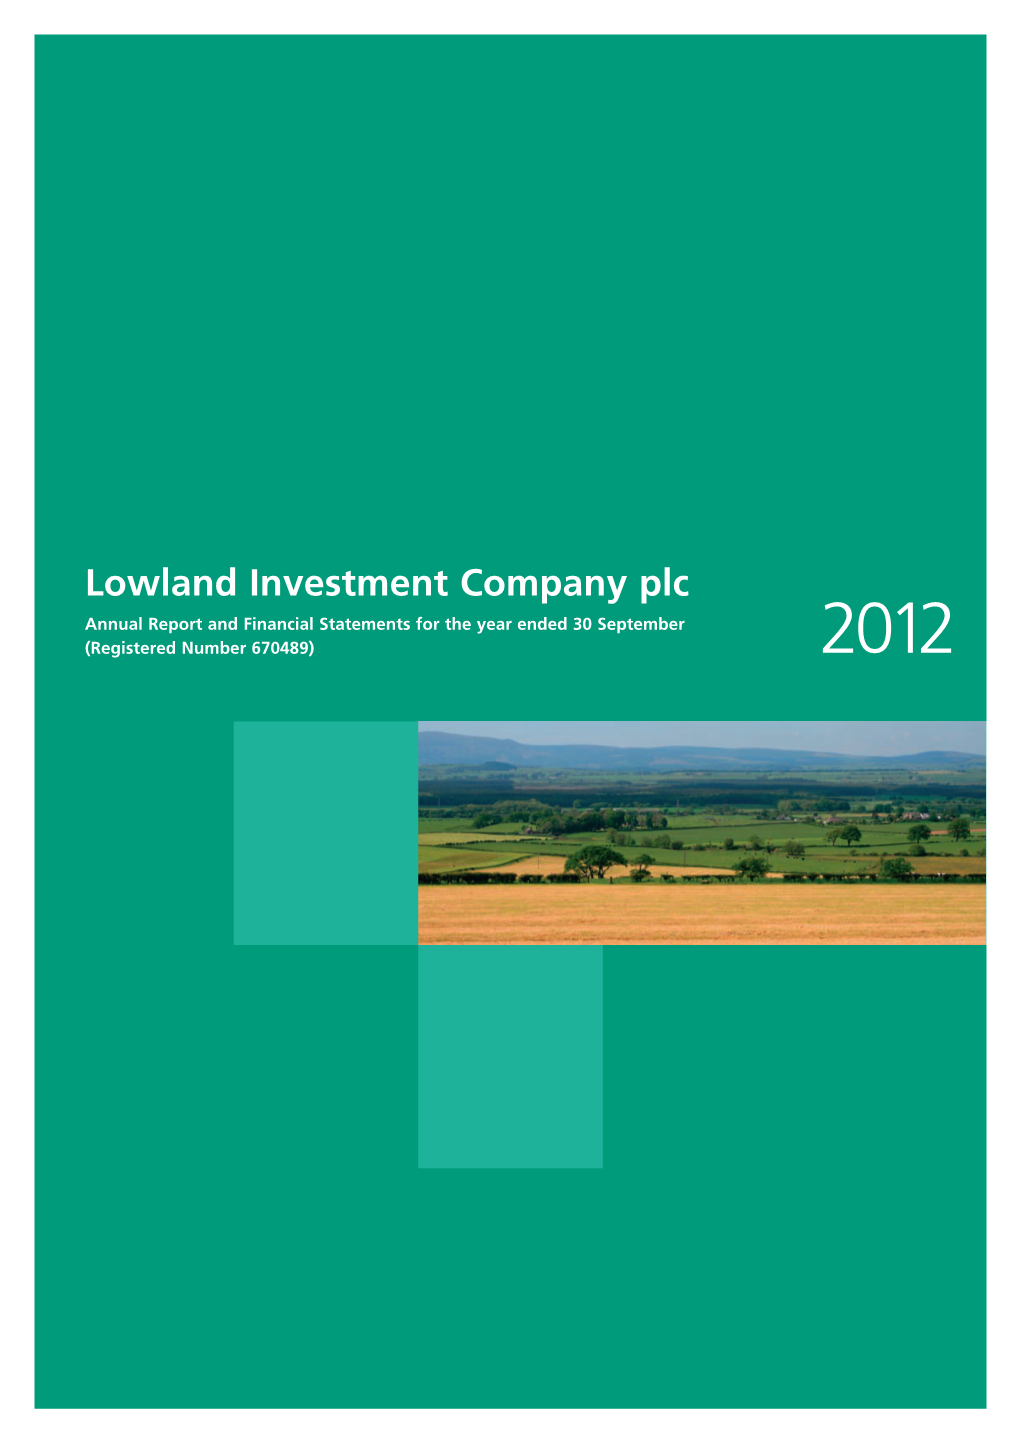 Lowland Investment Company Plc Annual Report and Financial Statements for the Year Ended 30 September (Registered Number 670489) 2012 Lowland Investment Company Plc